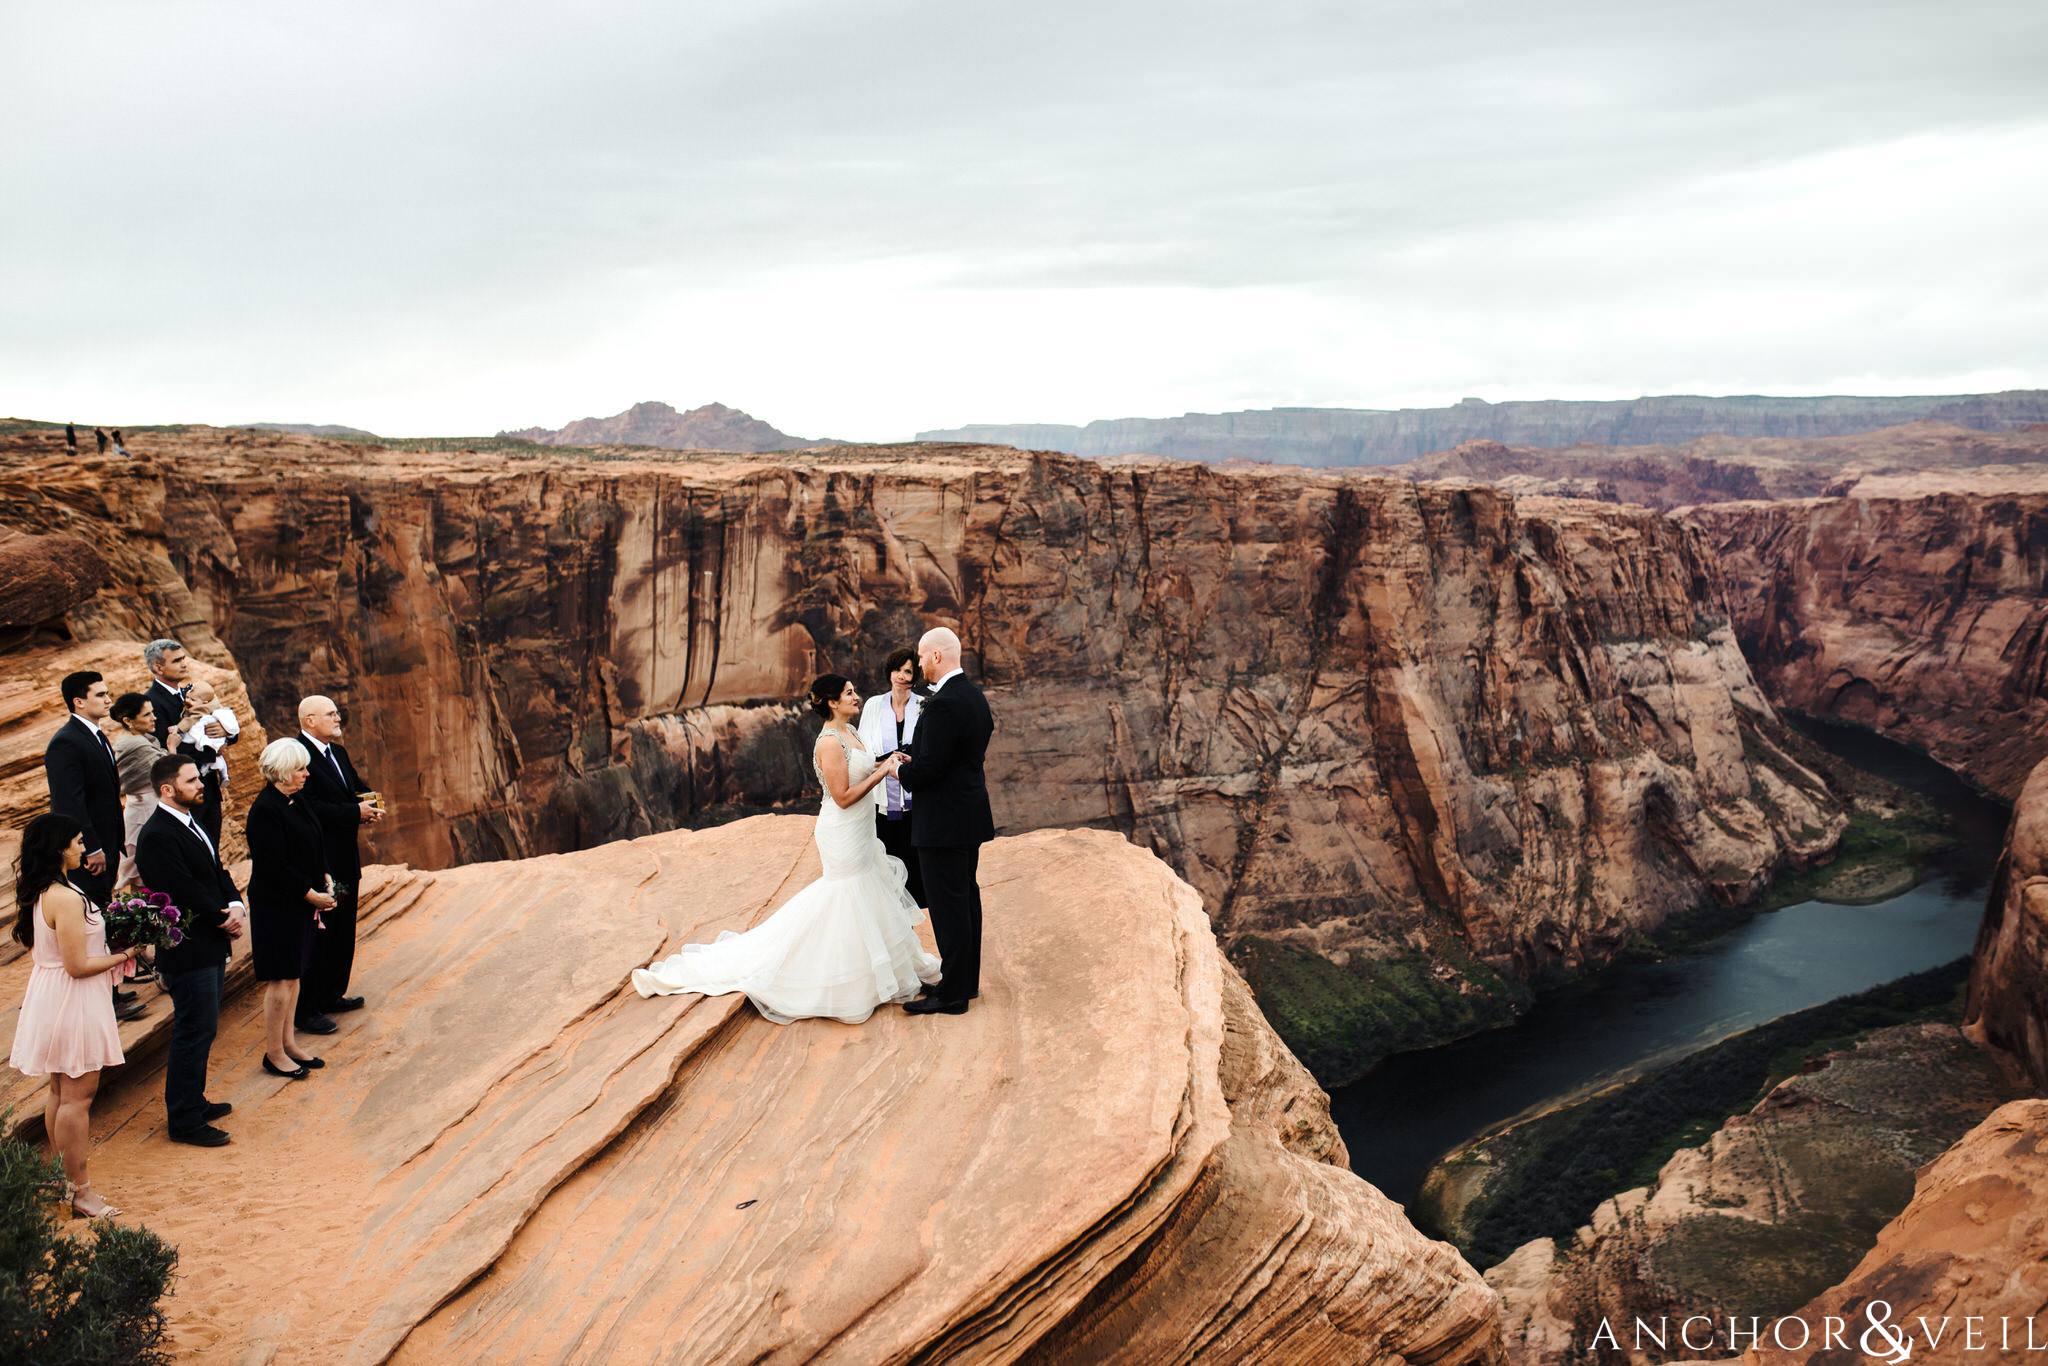 on the edge during their Horseshoe Bend Elopement Wedding